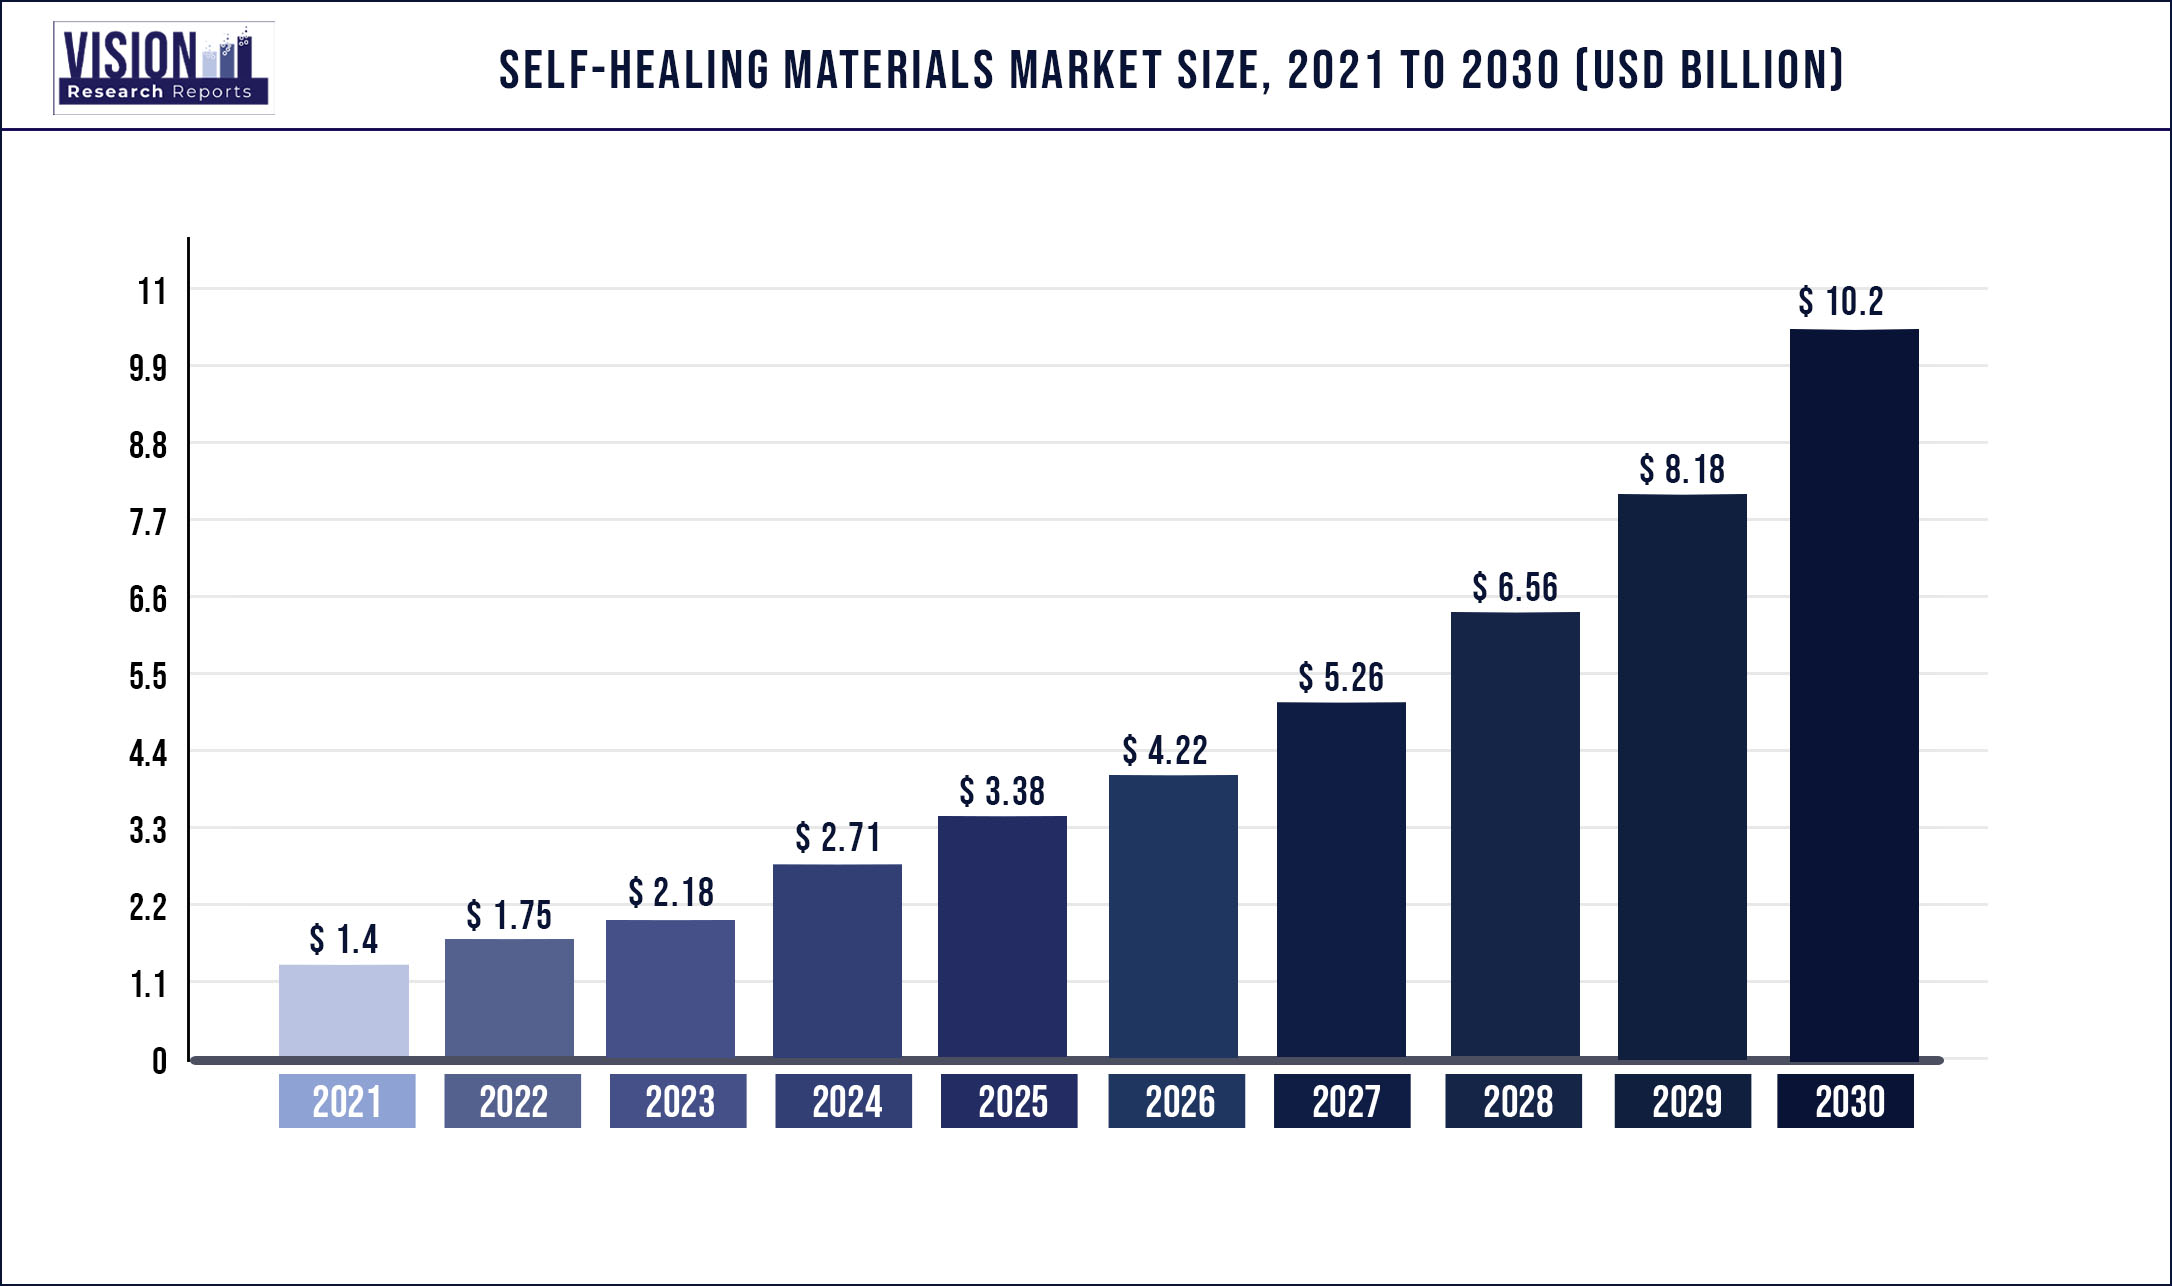 Self-healing Materials Market Size 2021 to 2030